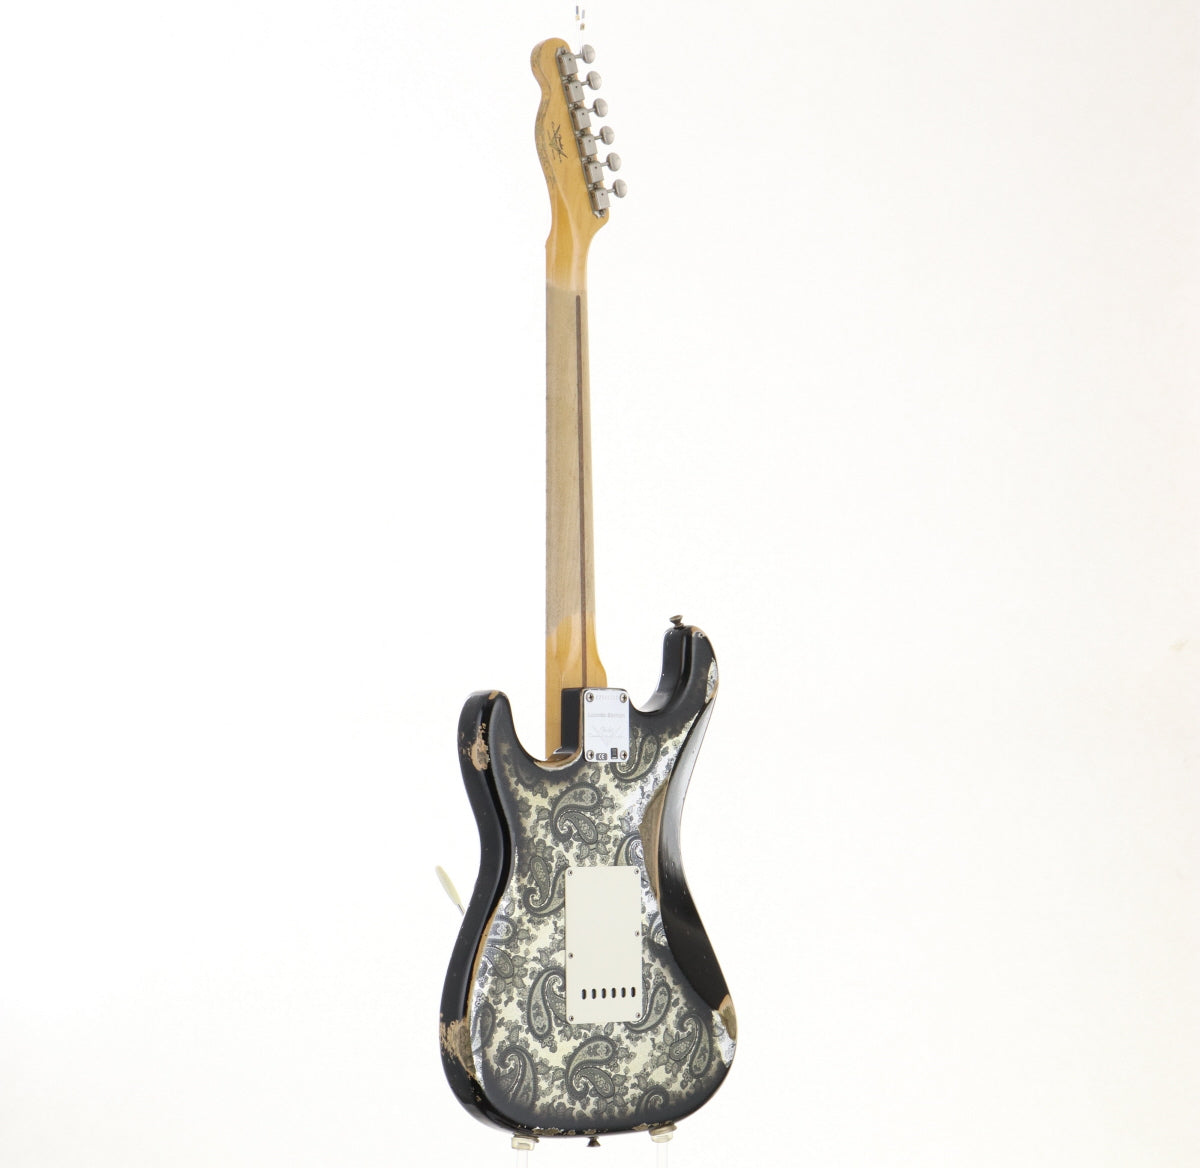 [SN CZ541715] USED Fender Custom Shop / Limited Mischief Maker Stratocaster Heavy Relic Black Paisley [10]